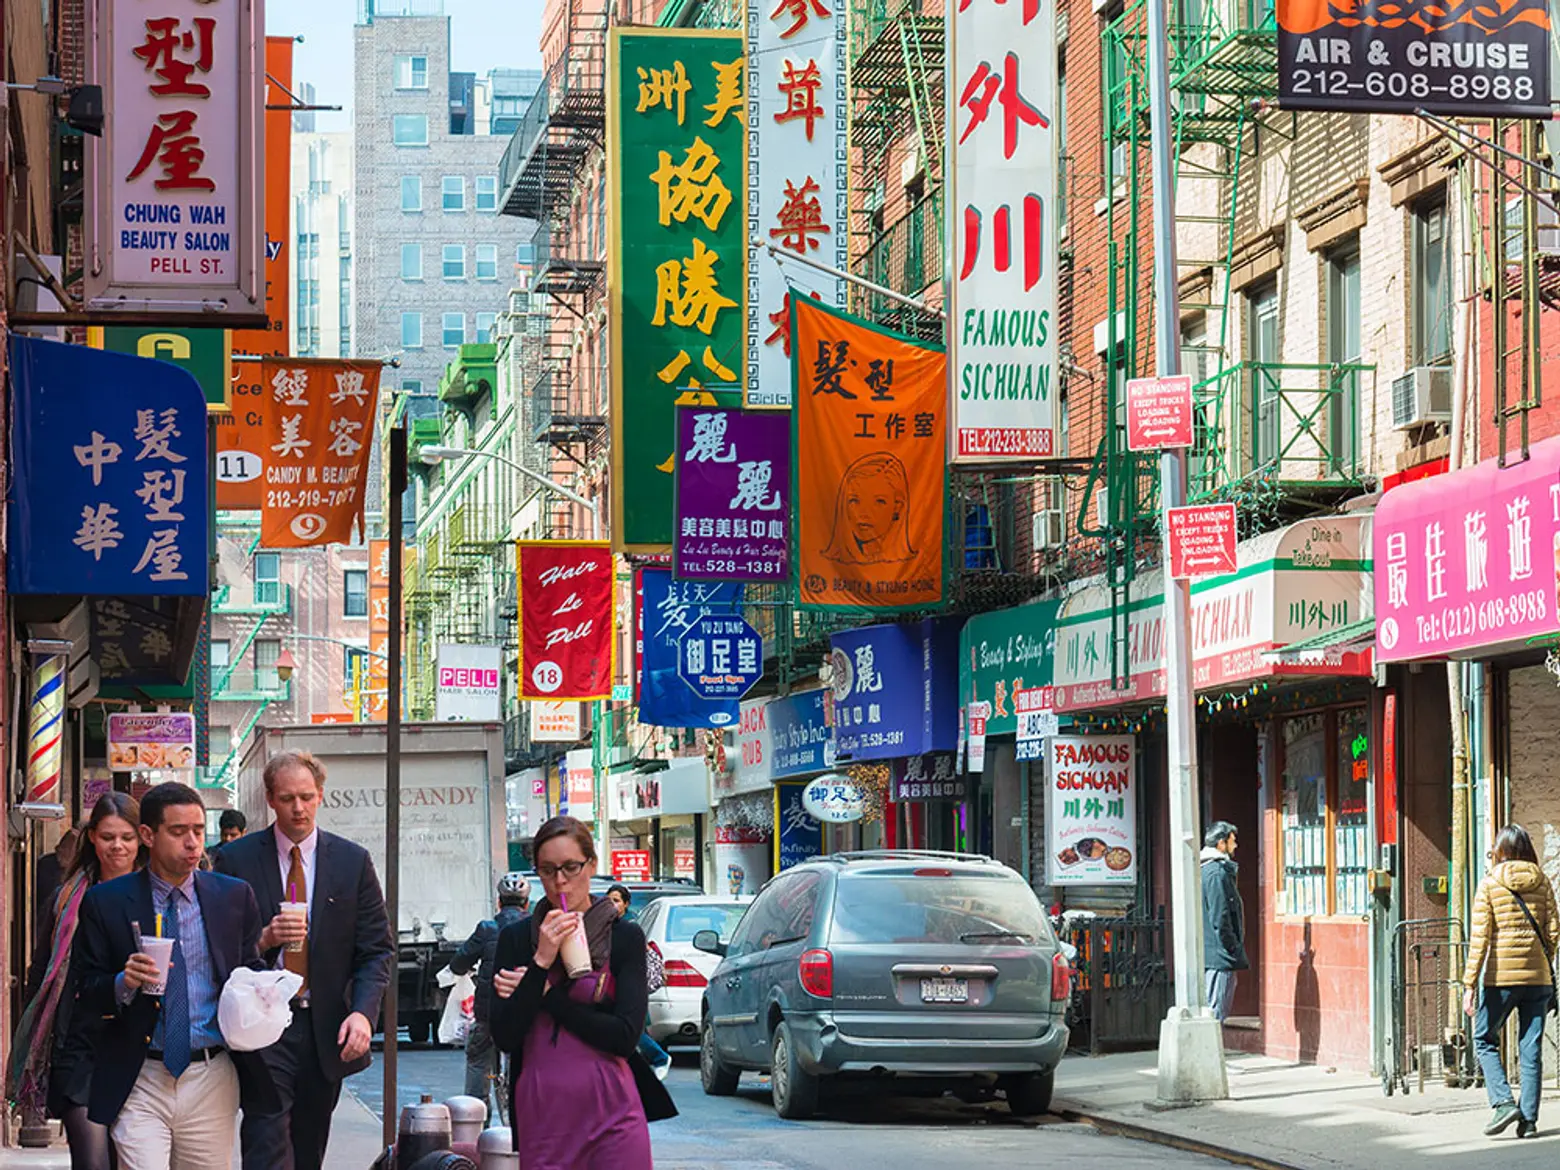 The vanishing restaurants of Chinatown; burn calories while taking in the art at the Met